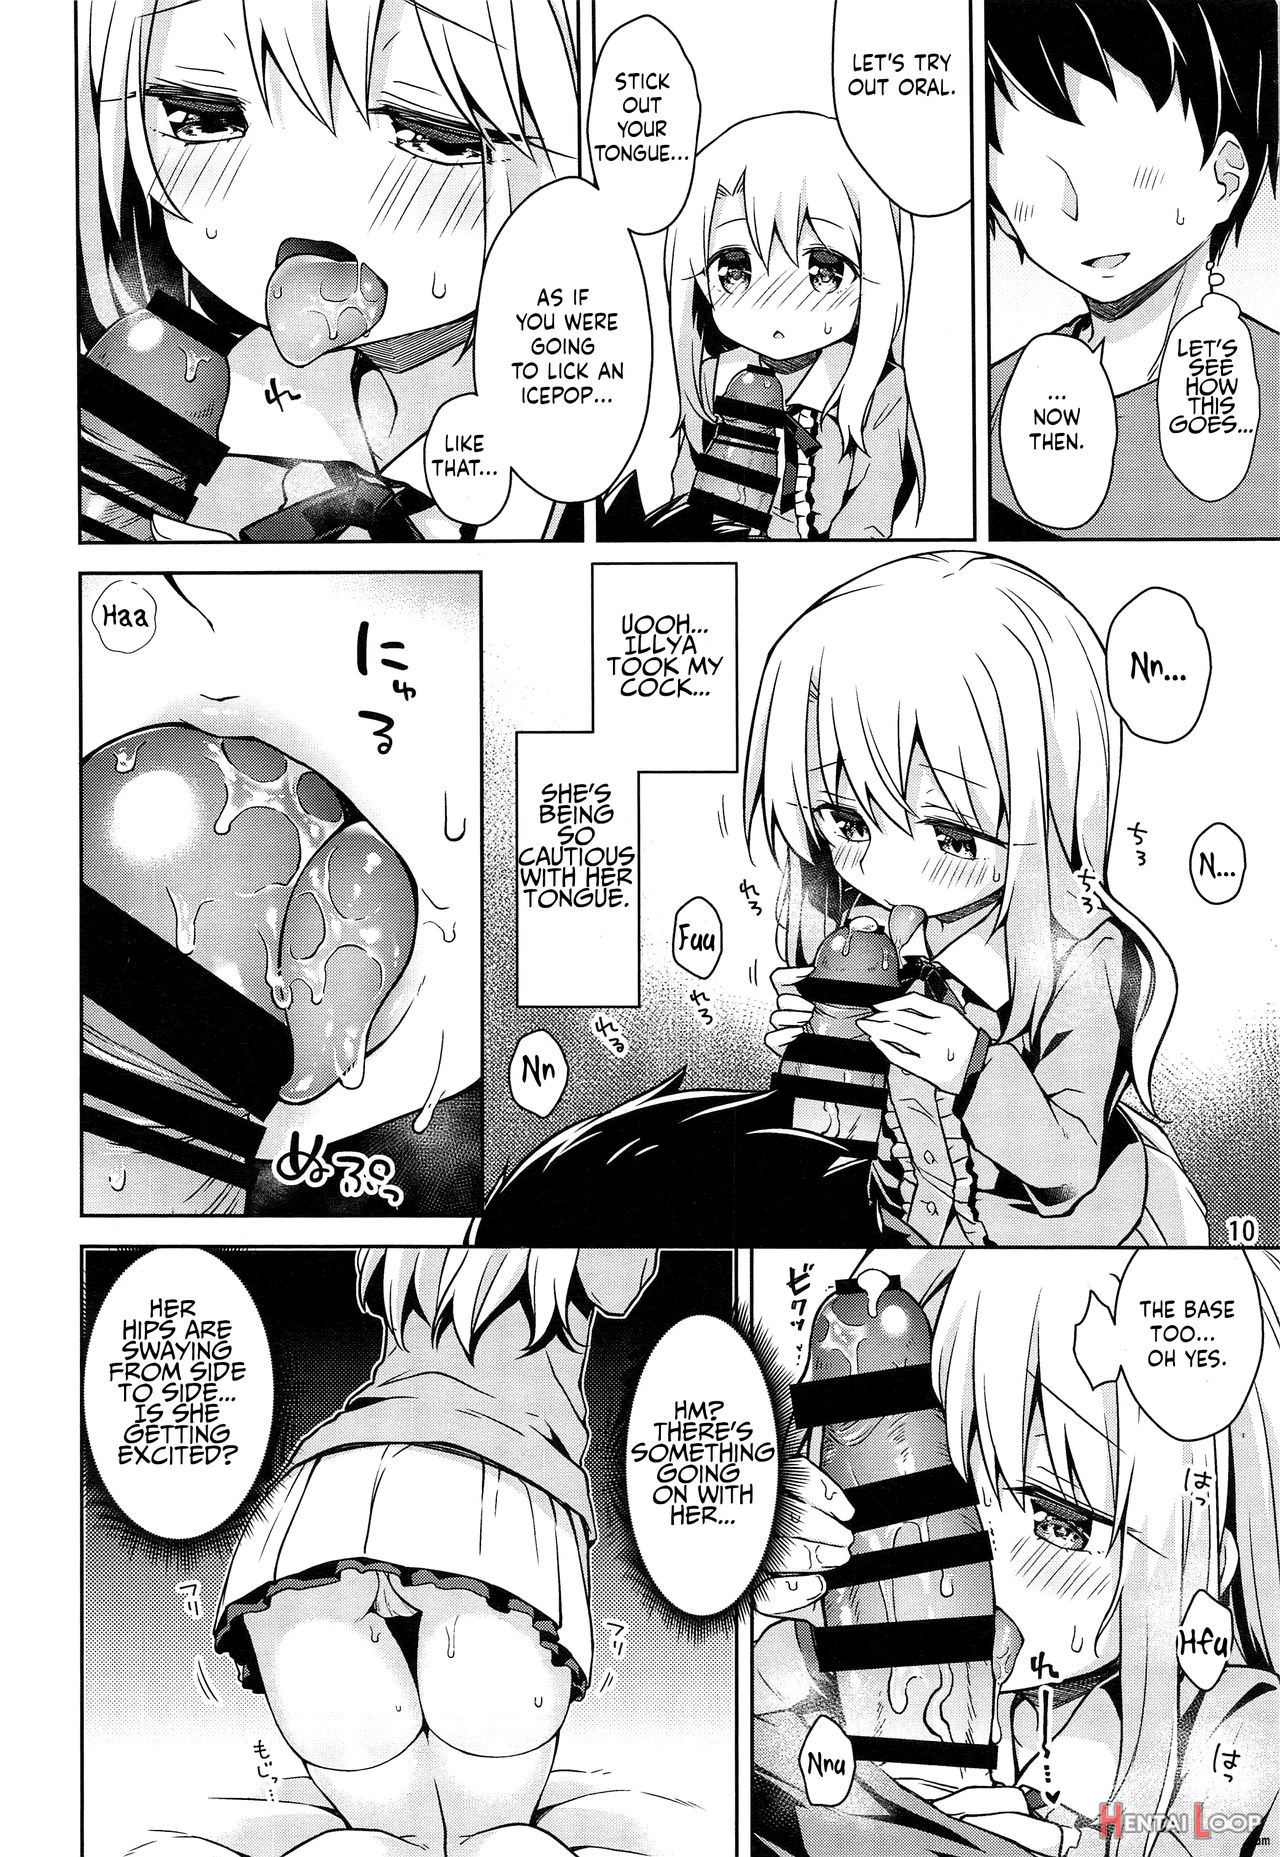 I Want To Have Sex With Illya At Home!! page 11